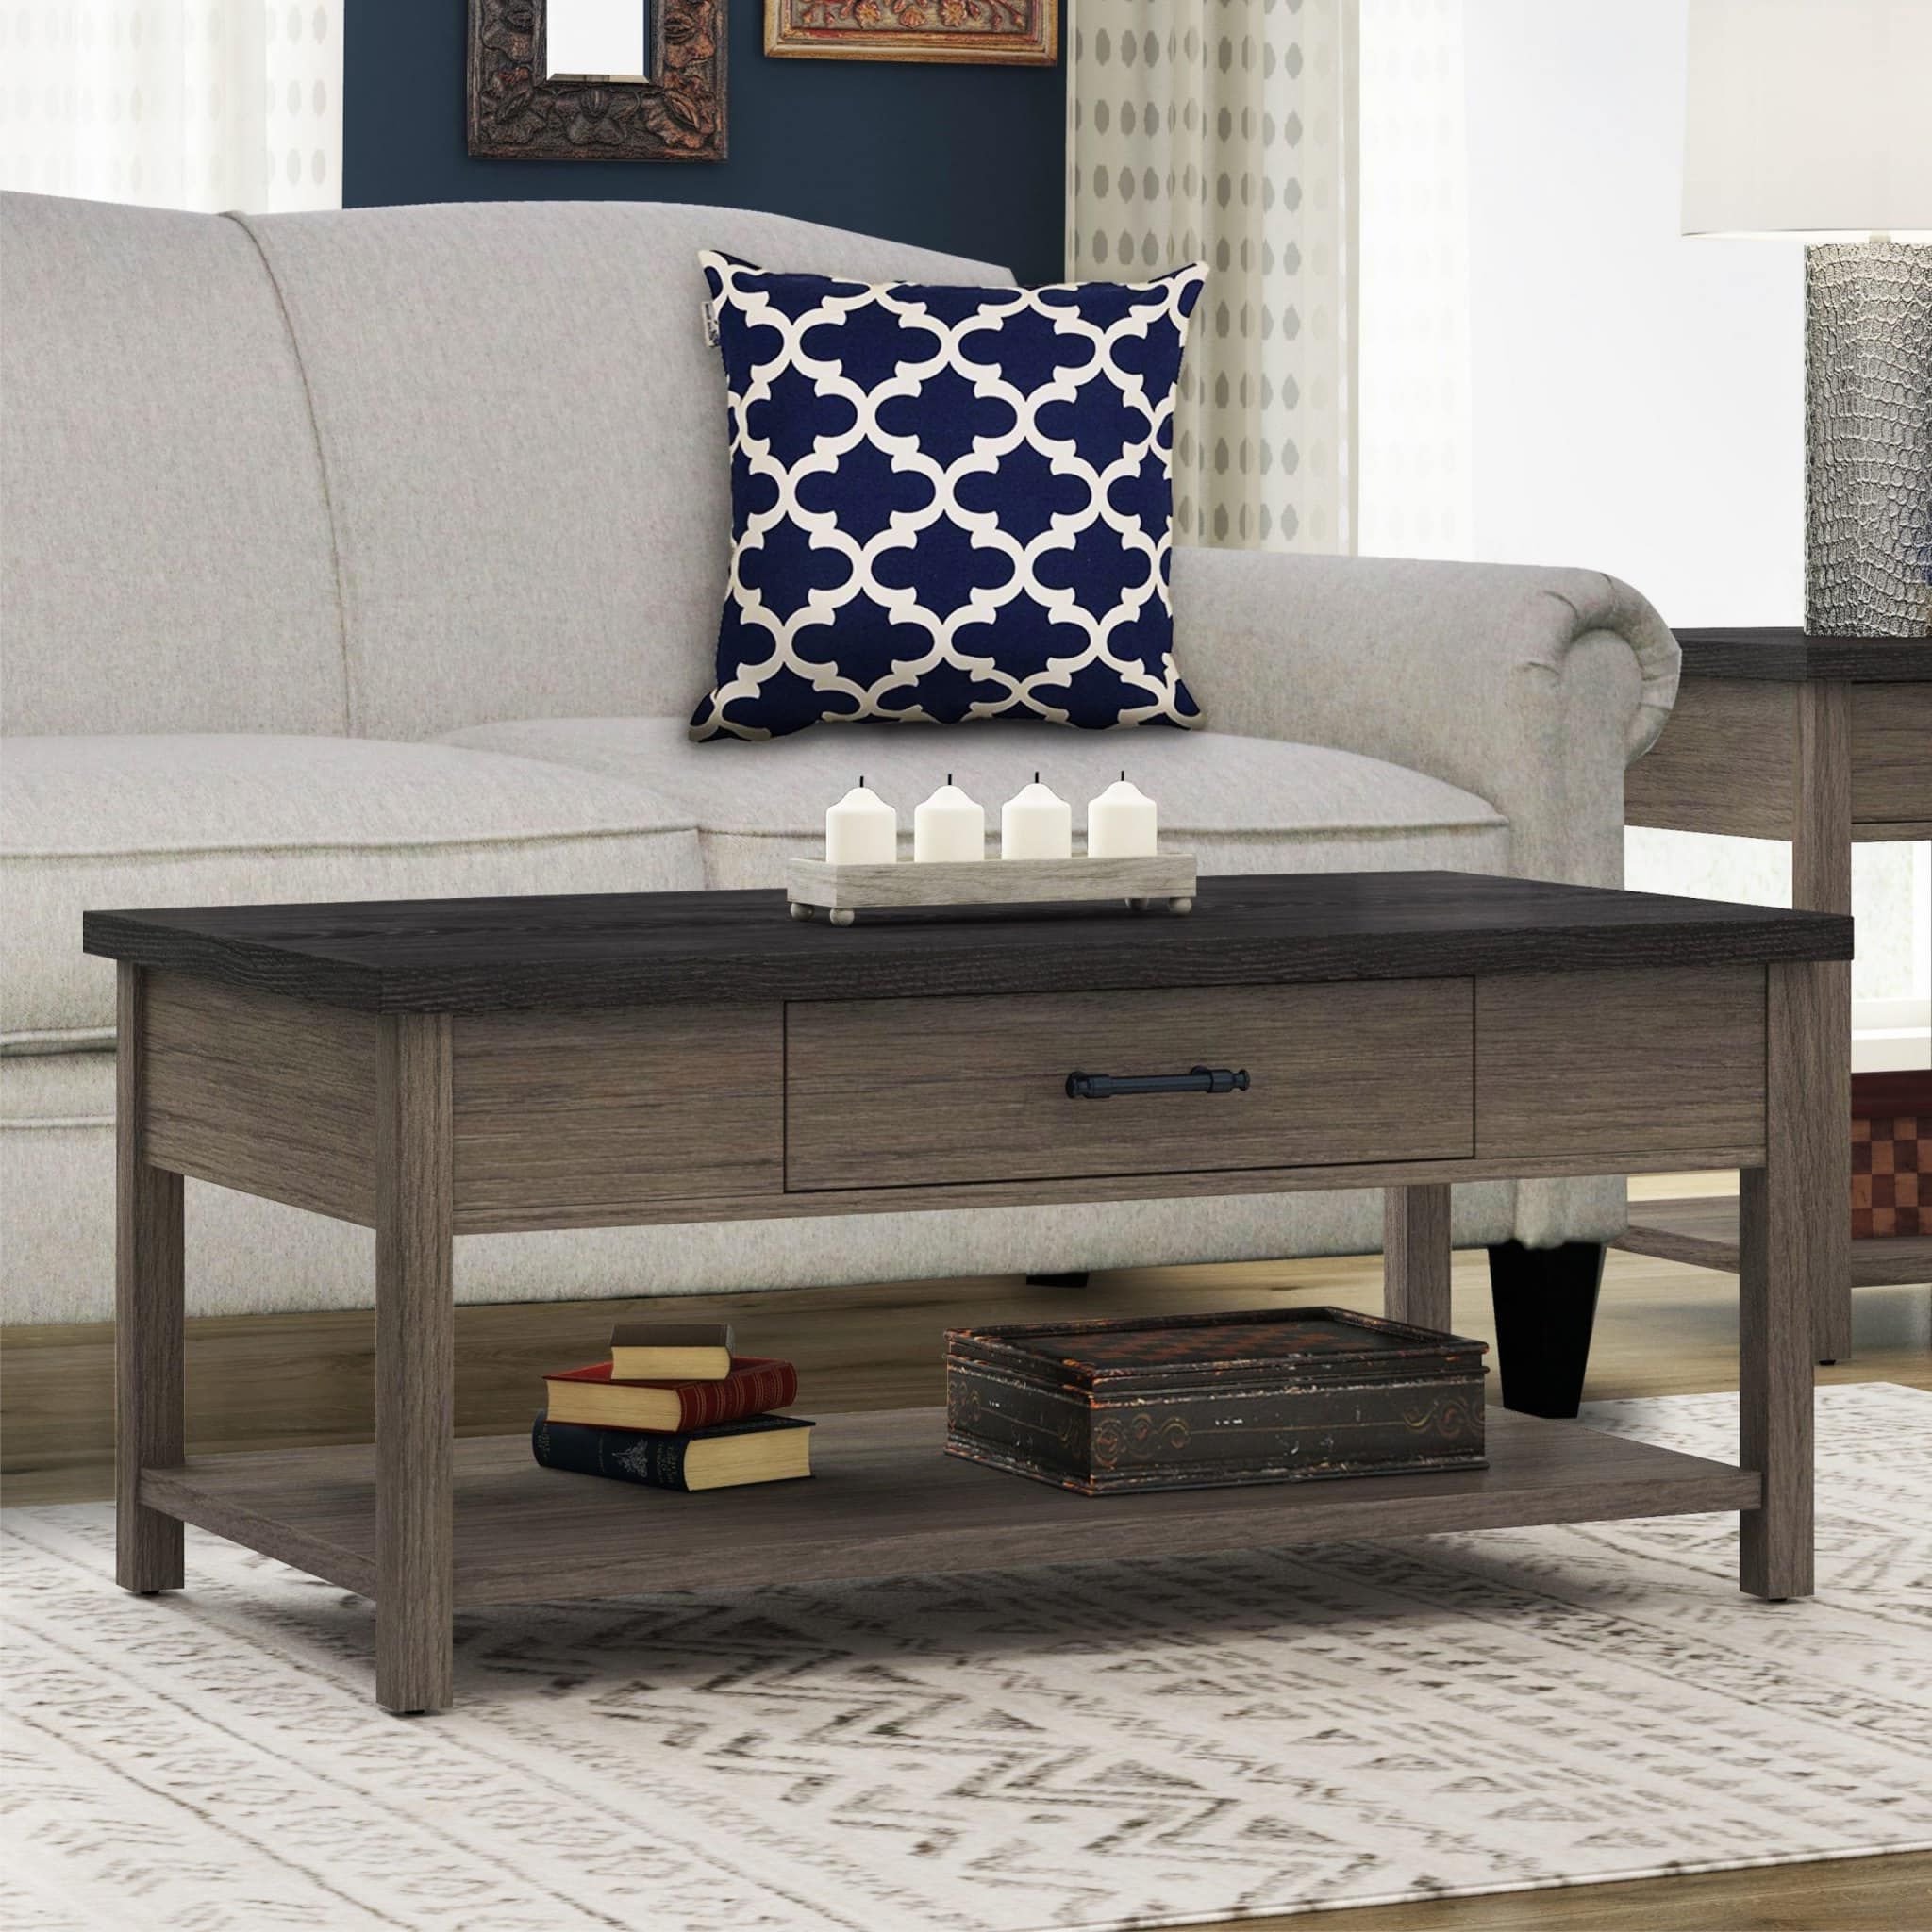 Two Tone Espresso And Medium Brown Coffee Table – Whalen Furniture Pertaining To Fashionable Medium Coffee Tables (View 16 of 20)